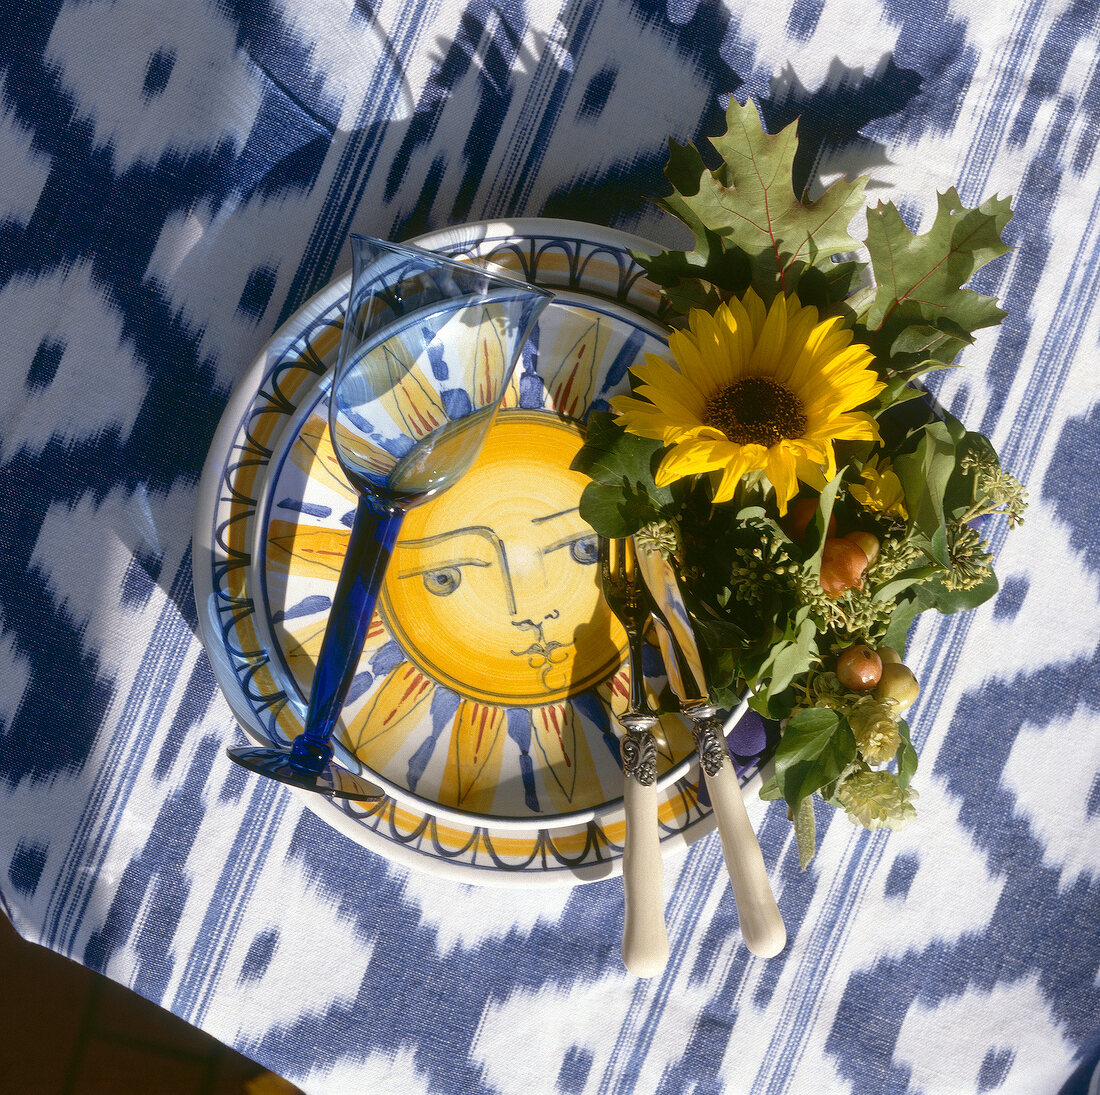 Ceramic dish with sun motif with blue wine glass and sunflower